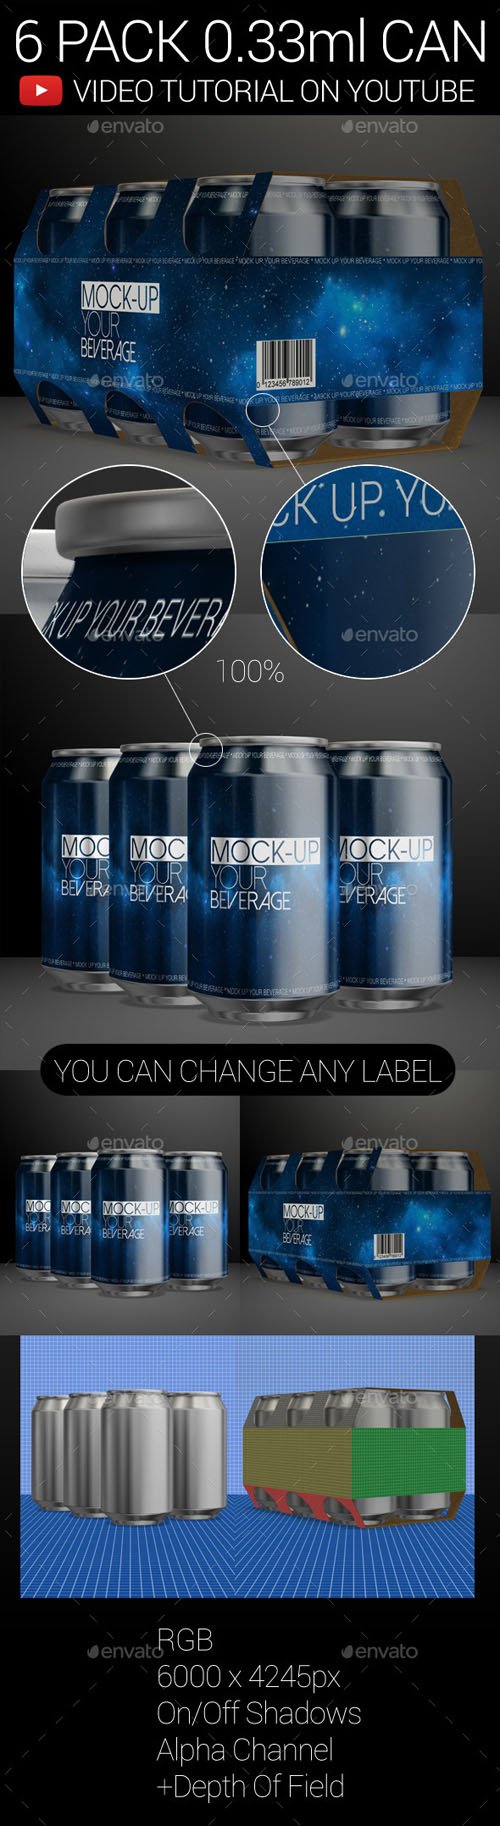 6 Pack 0.33ml Can 02 - Graphicriver 9961102